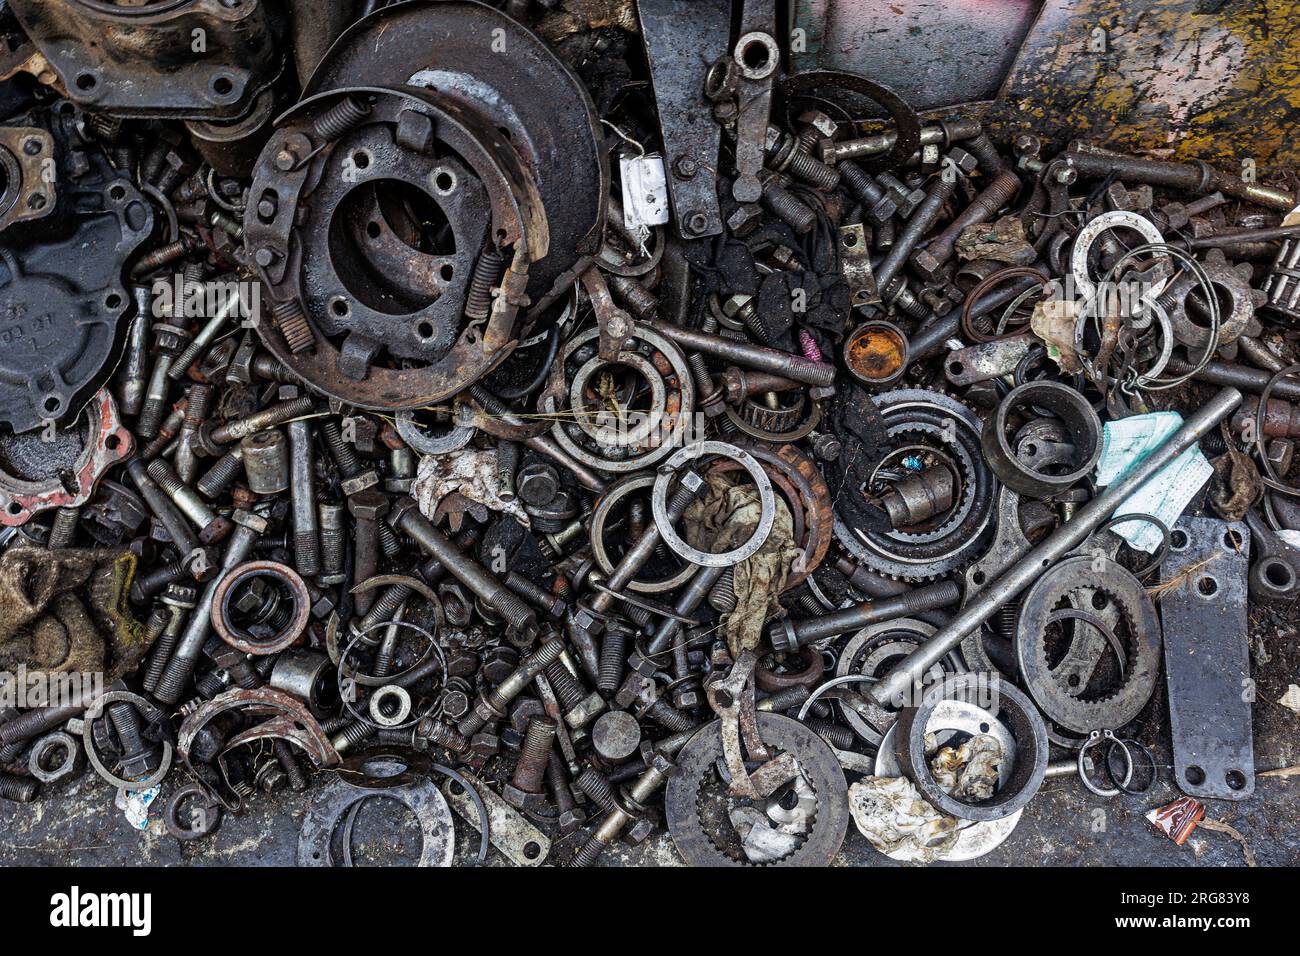 Tons of mechanic parts in a Bangkok Chinatown workshop. Stock Photo